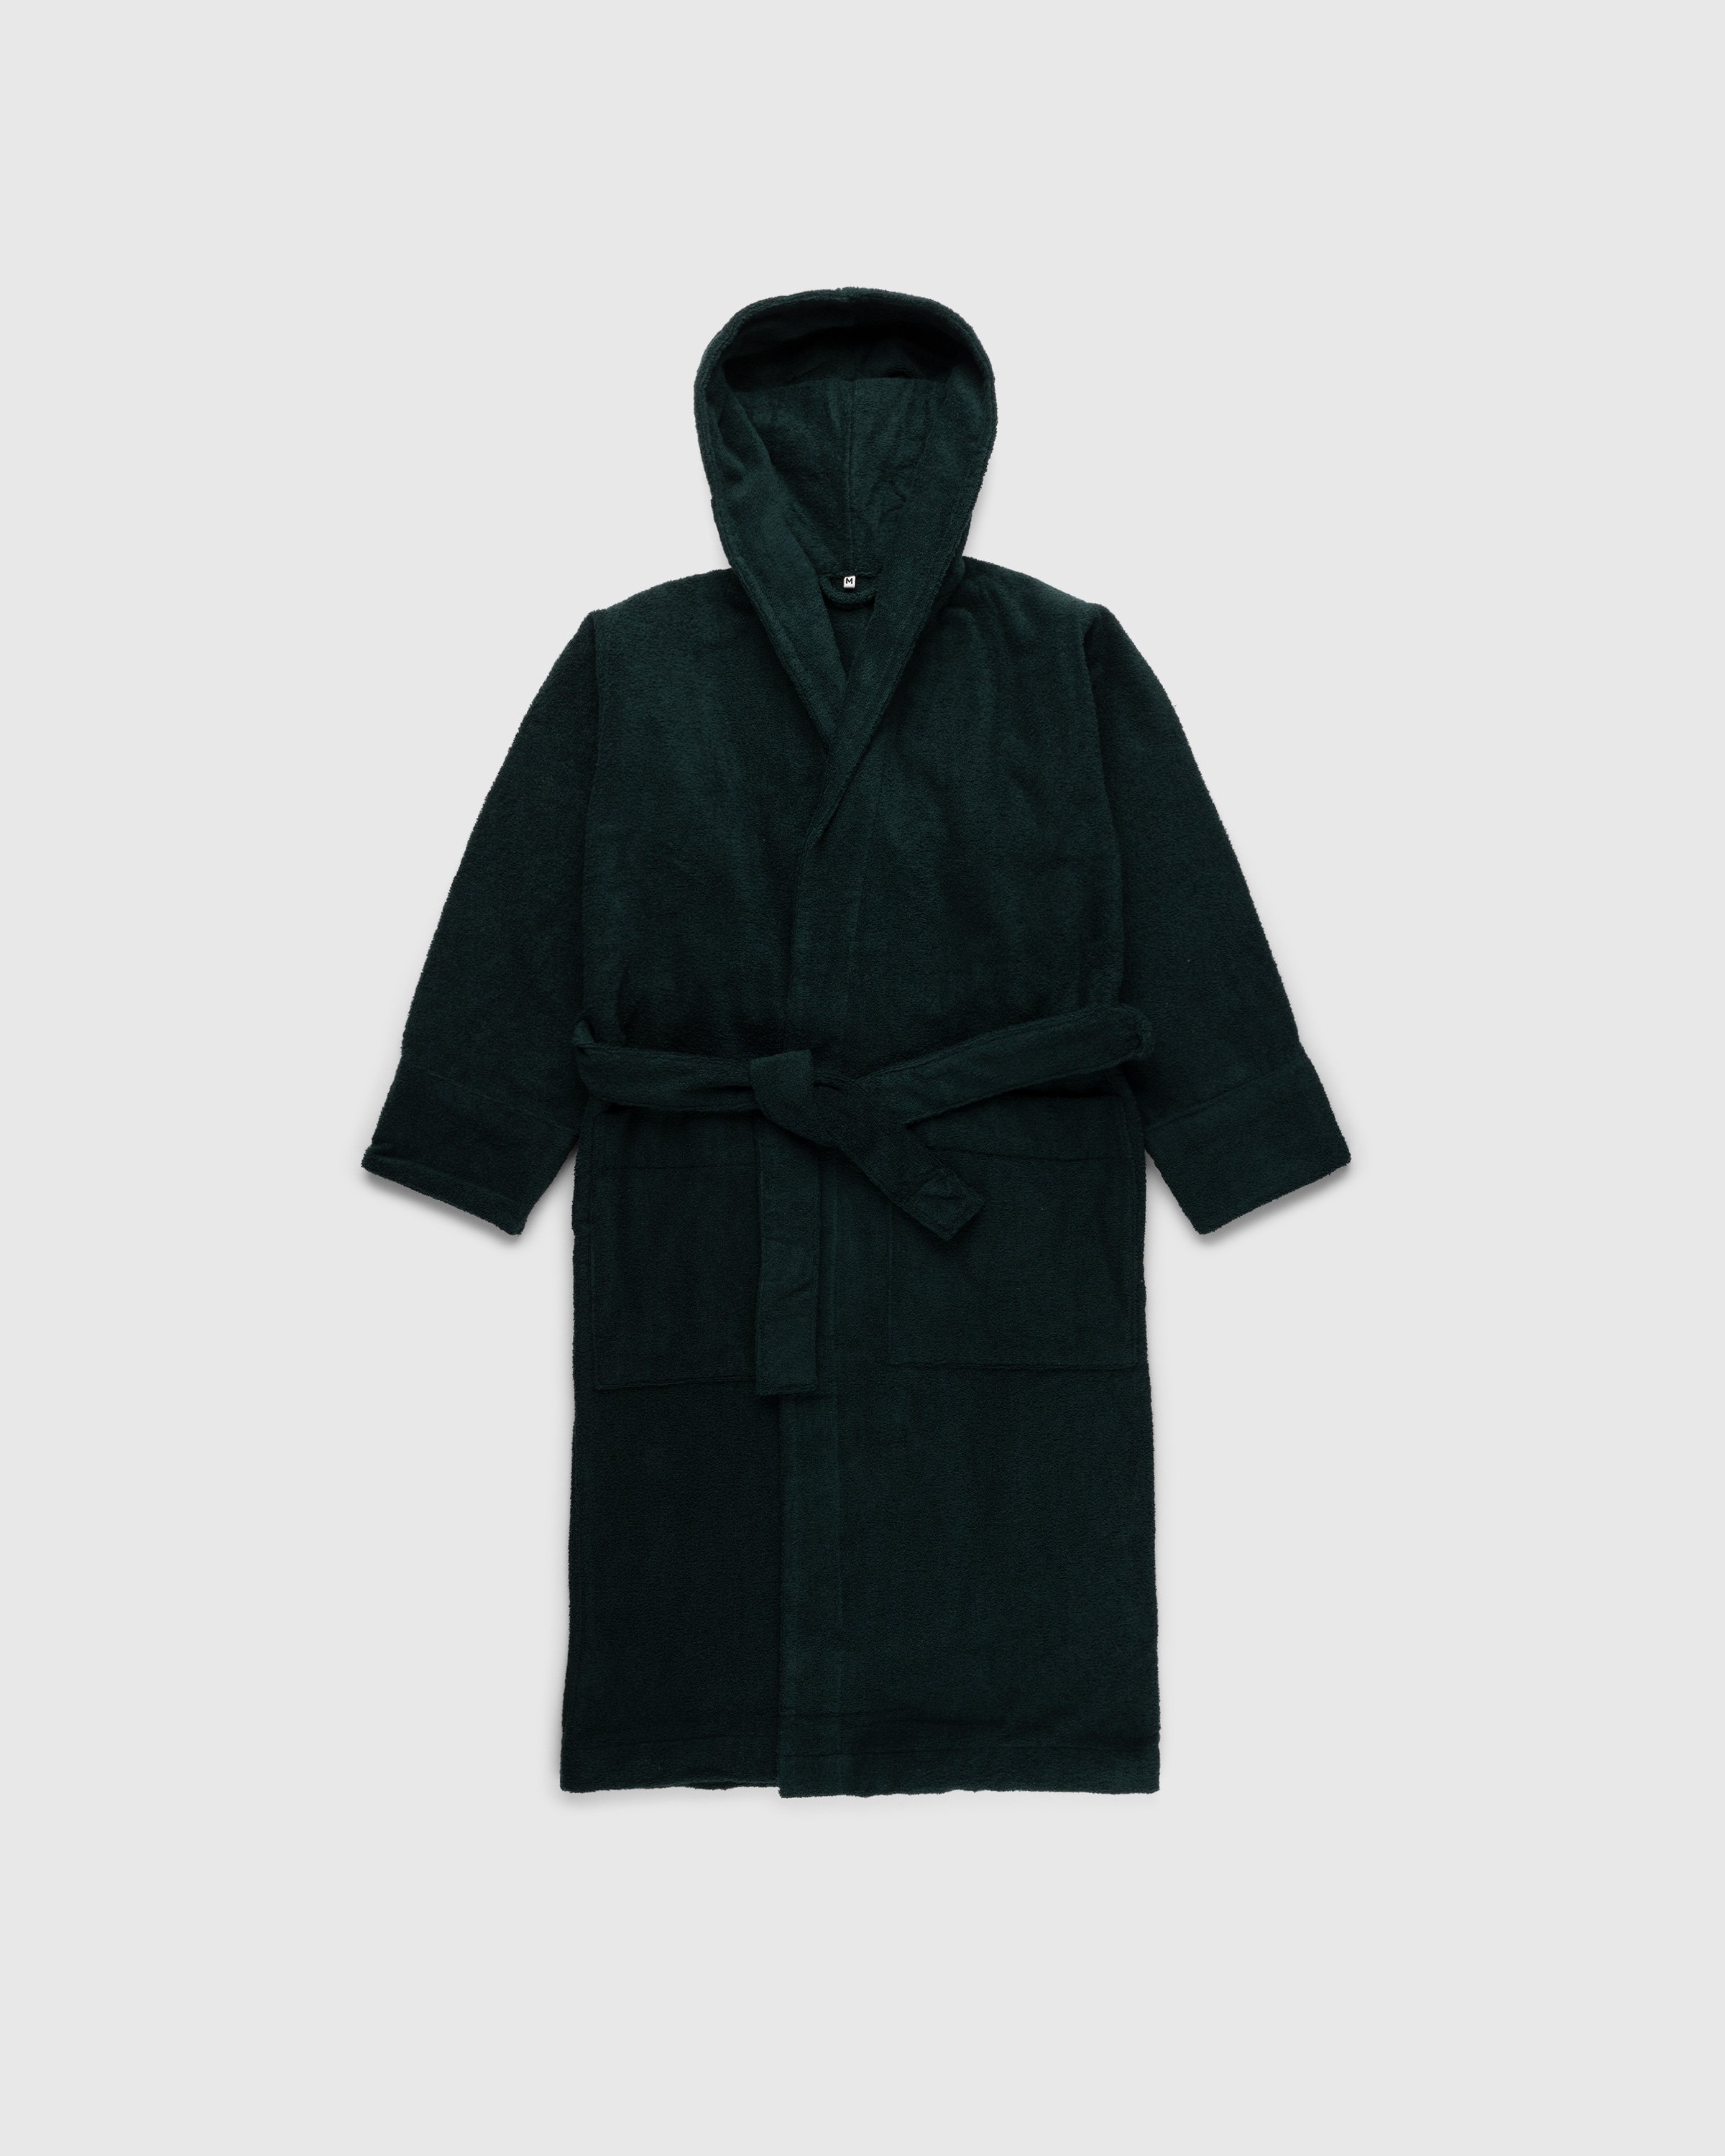 Tekla - Hooded Bathrobe Solid Forest Green - Lifestyle - Green - Image 1